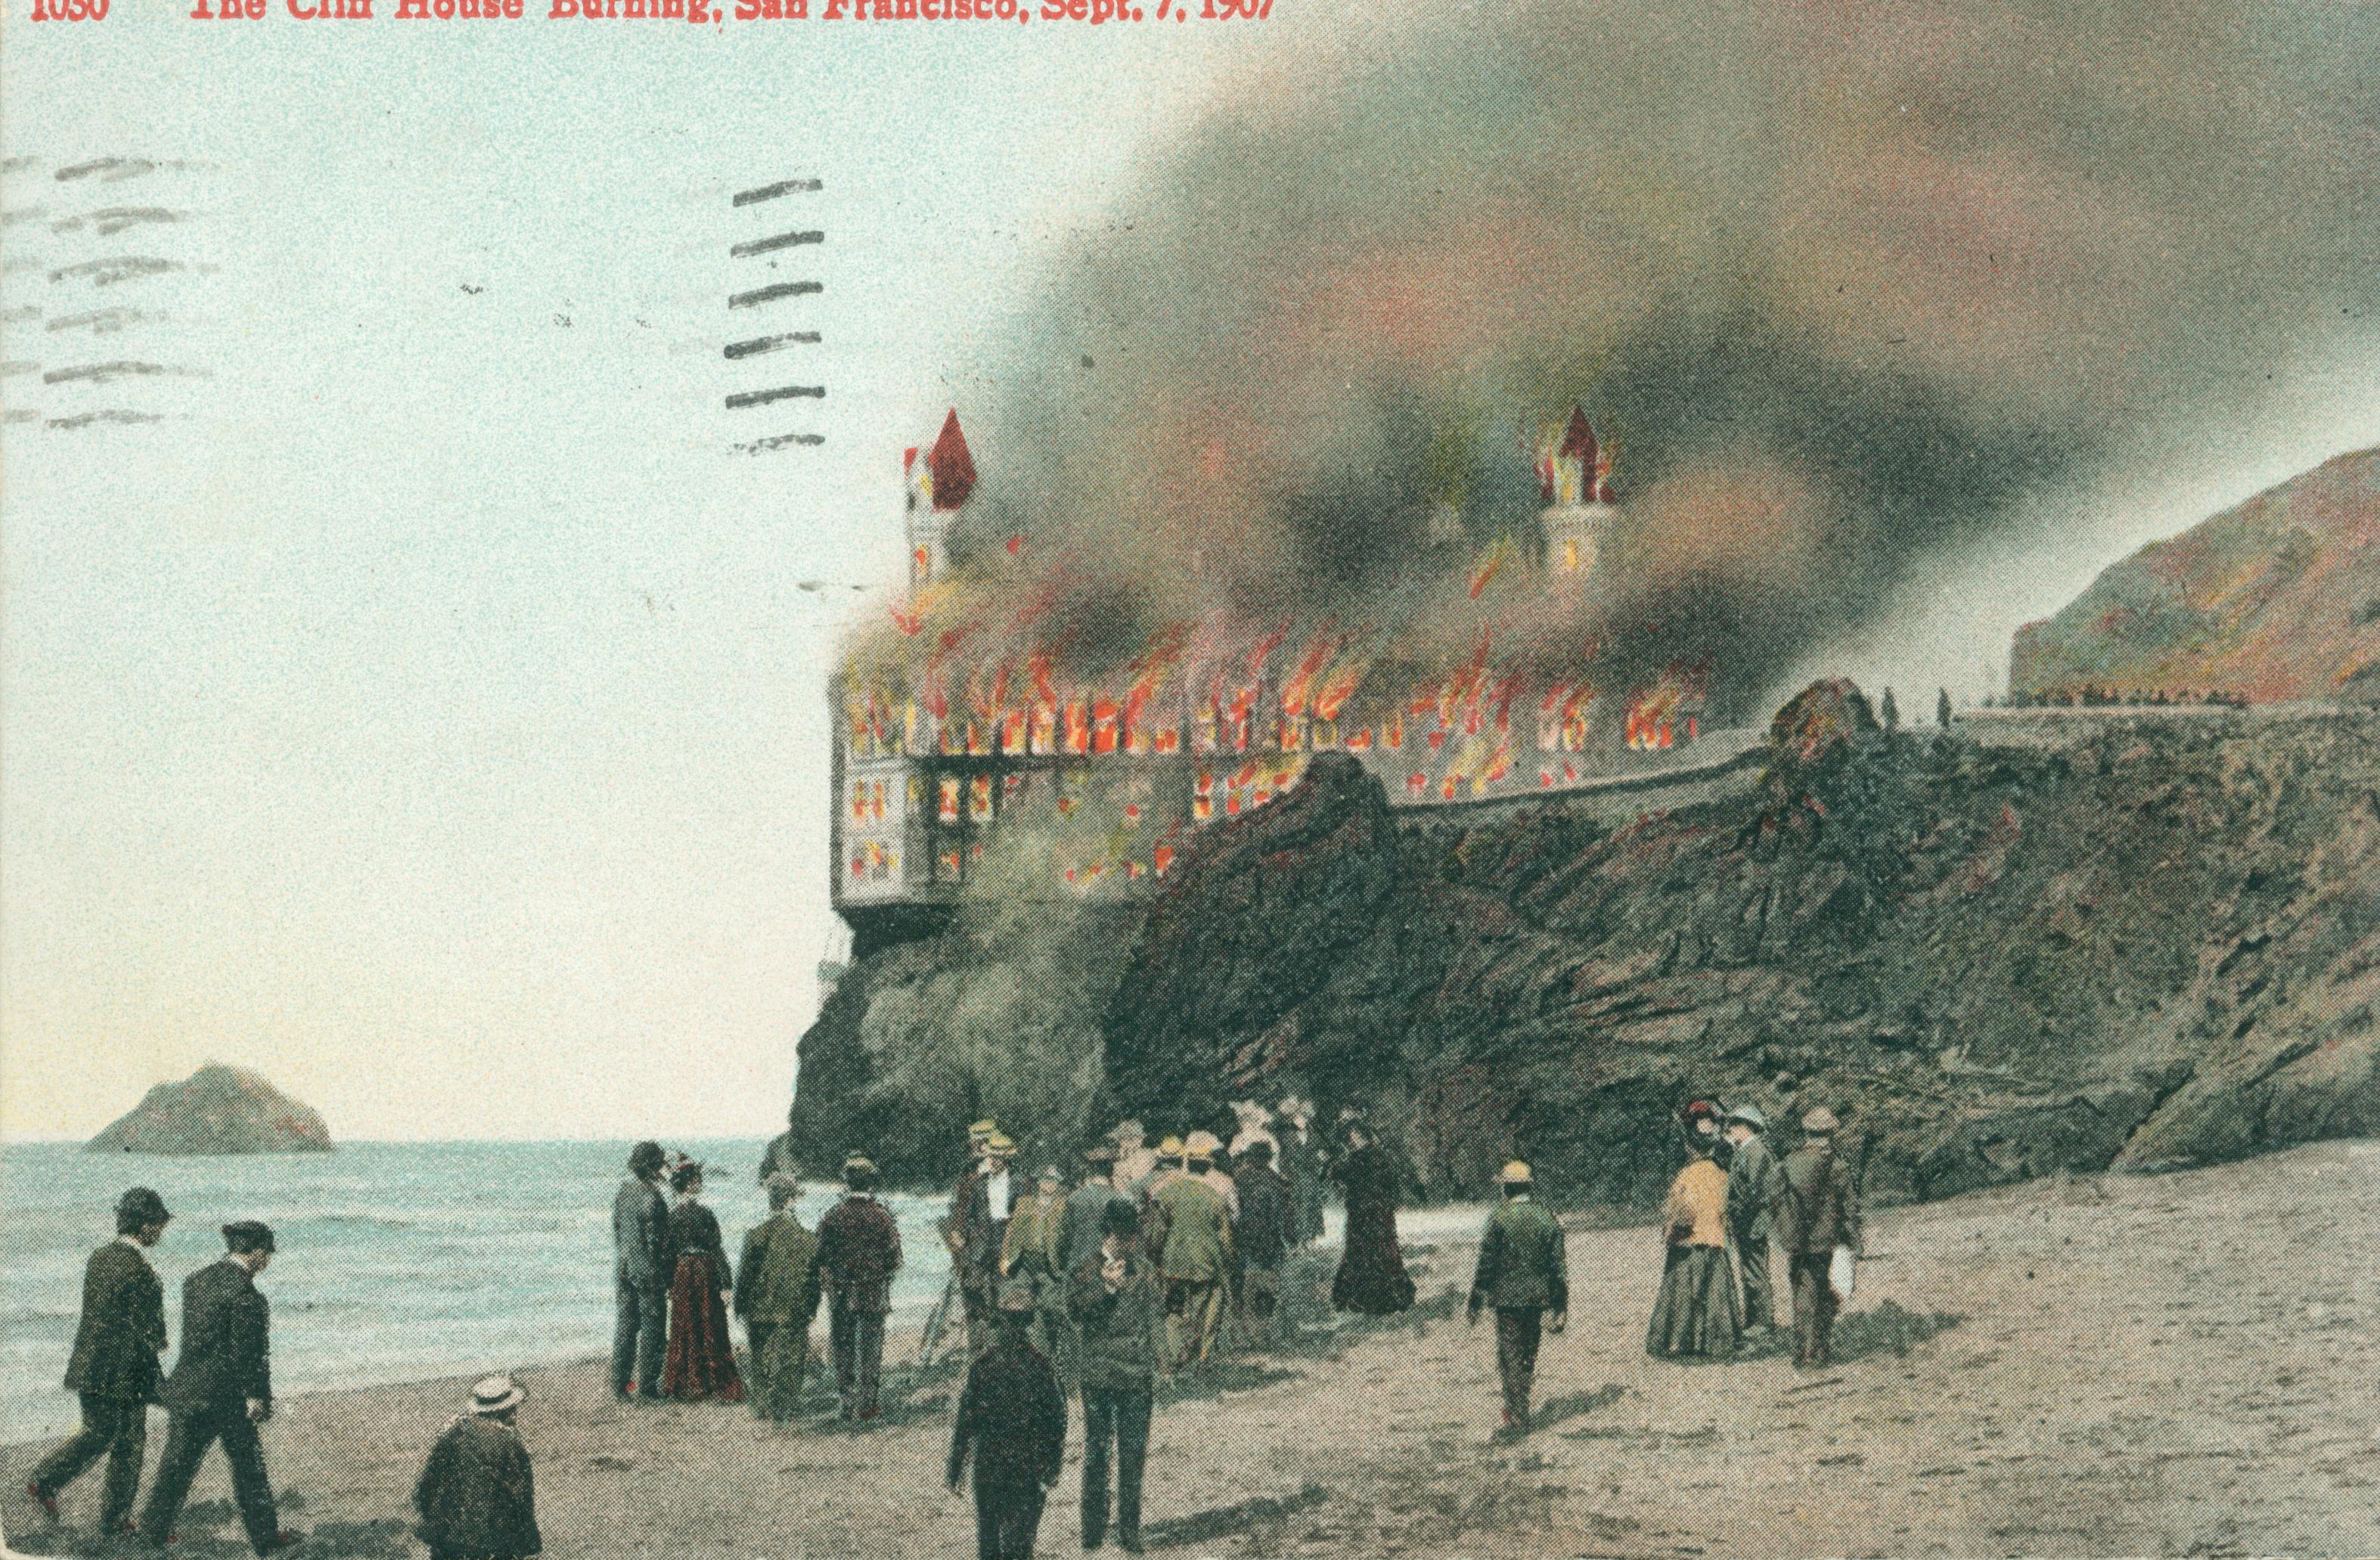 Shows the Cliff House on fire with several individuals looking on from the beach.